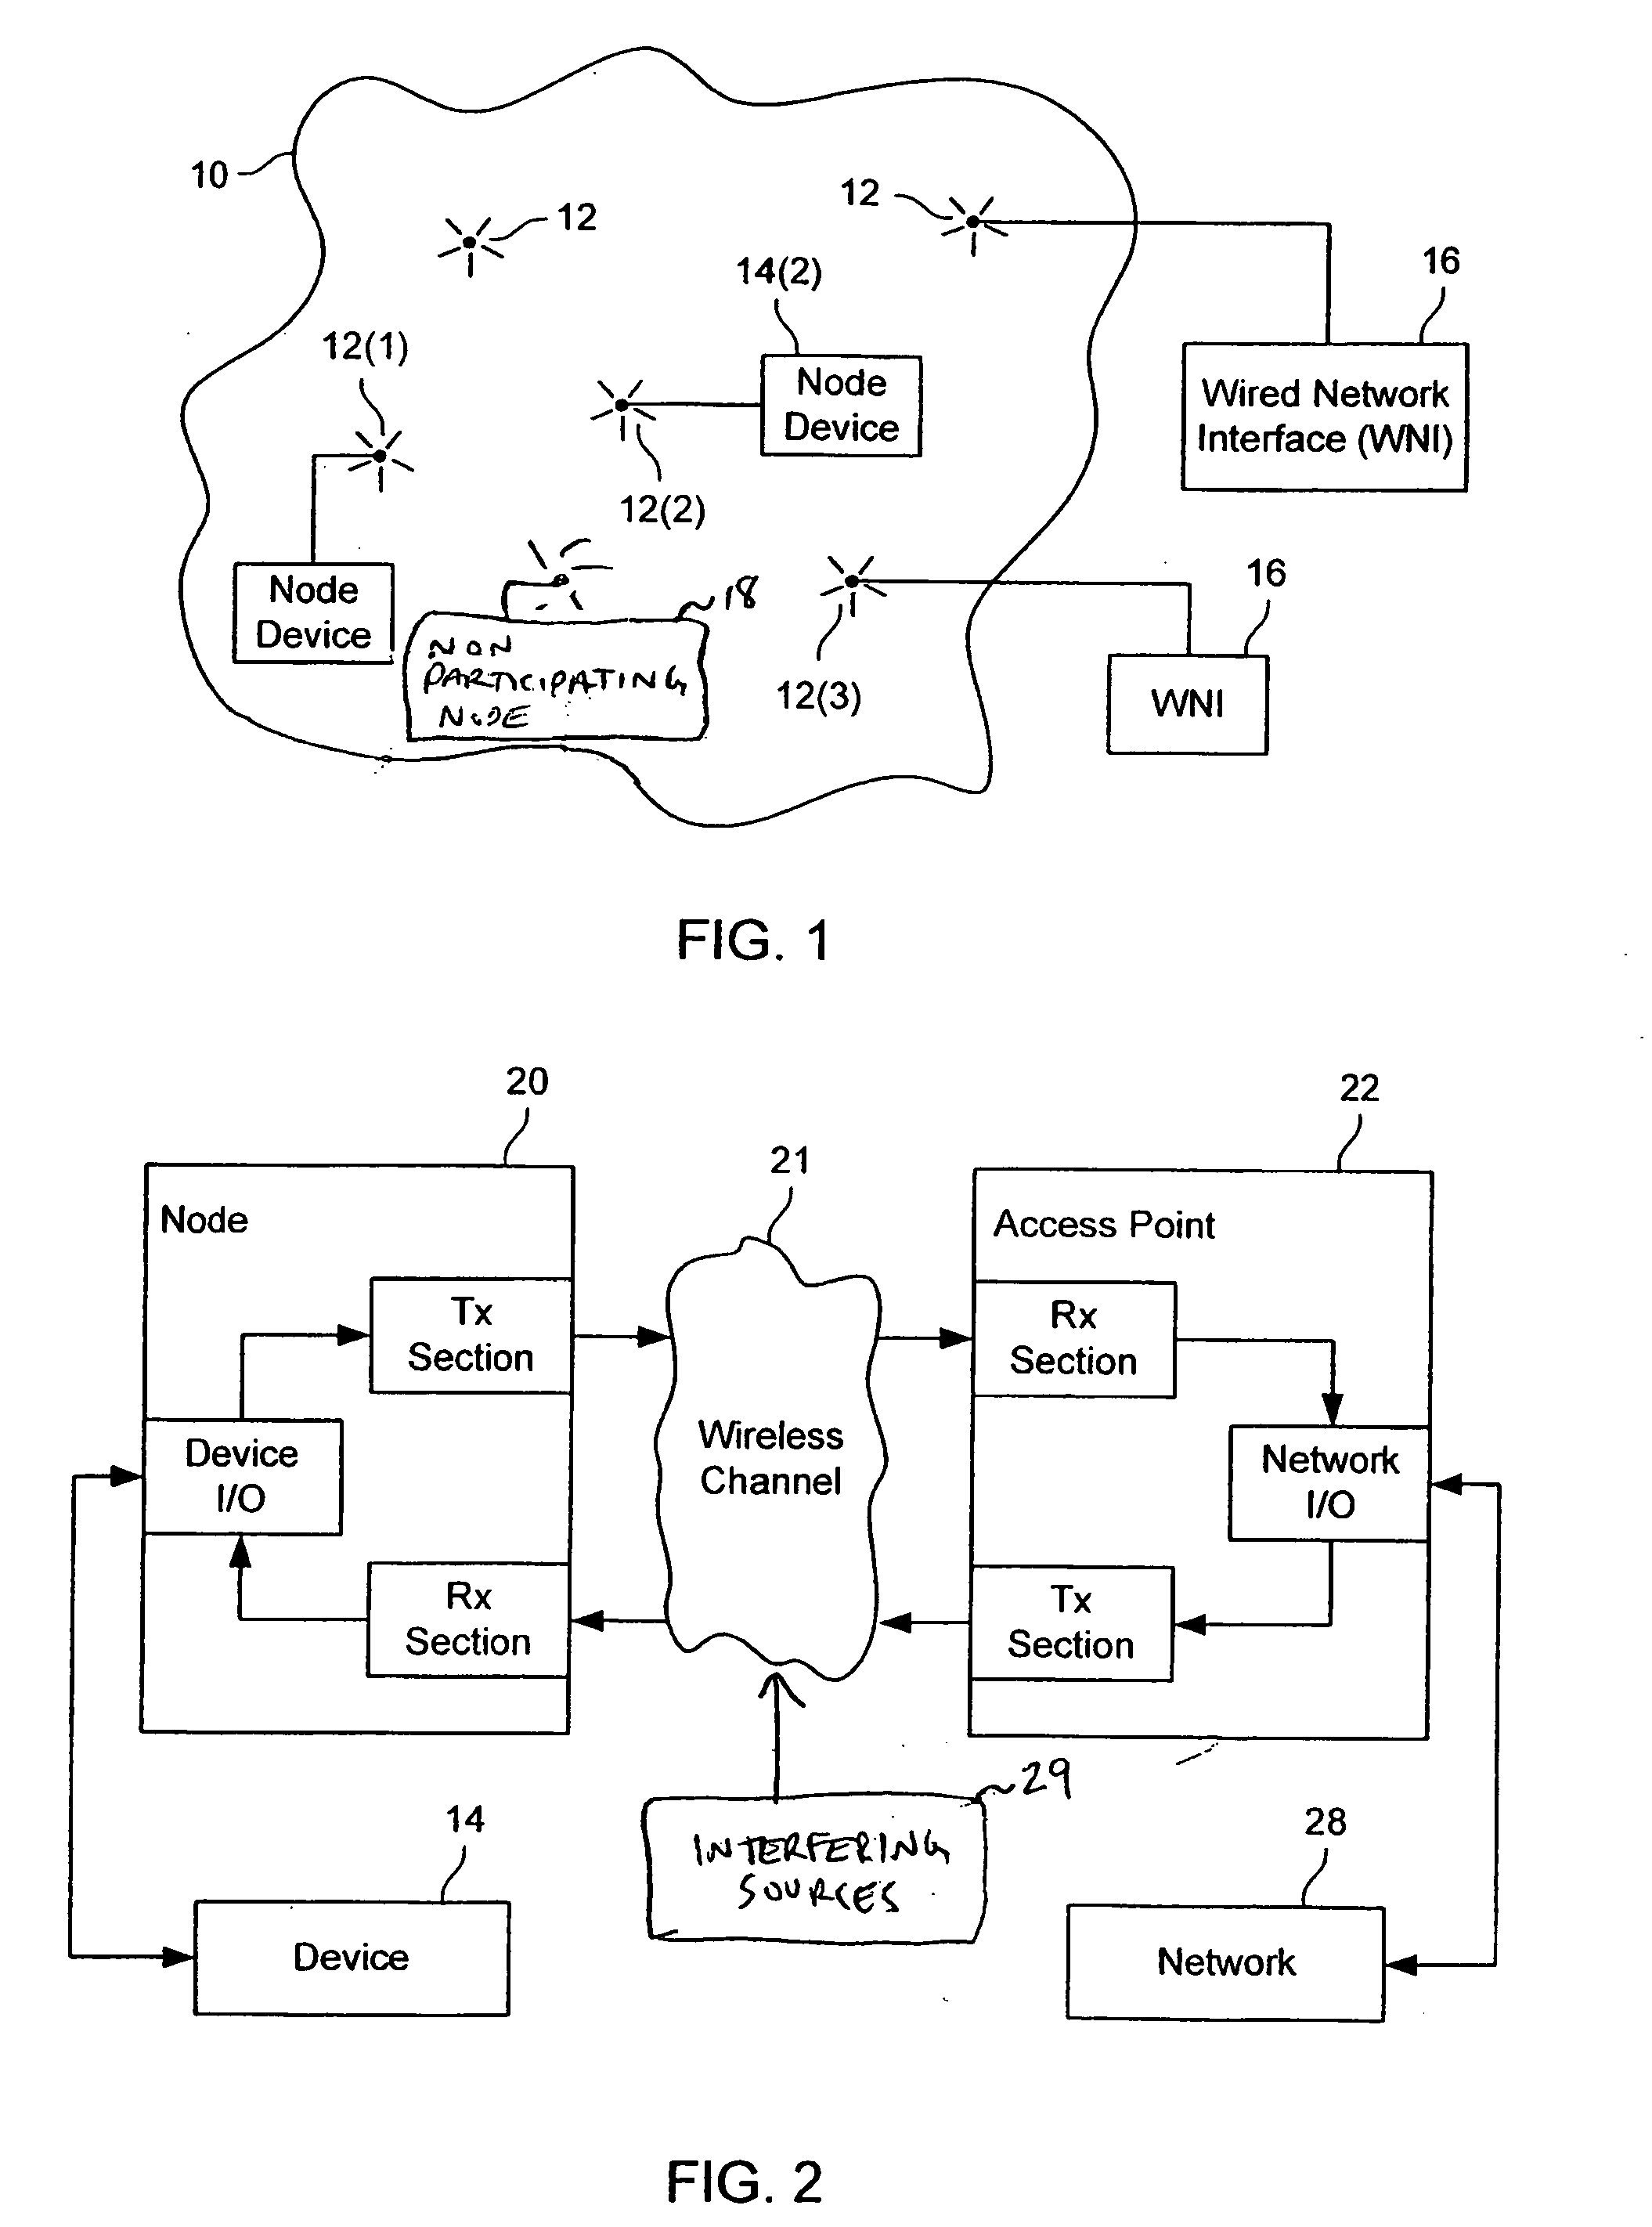 Adaptive packet detection for detecting packets in a wireless medium